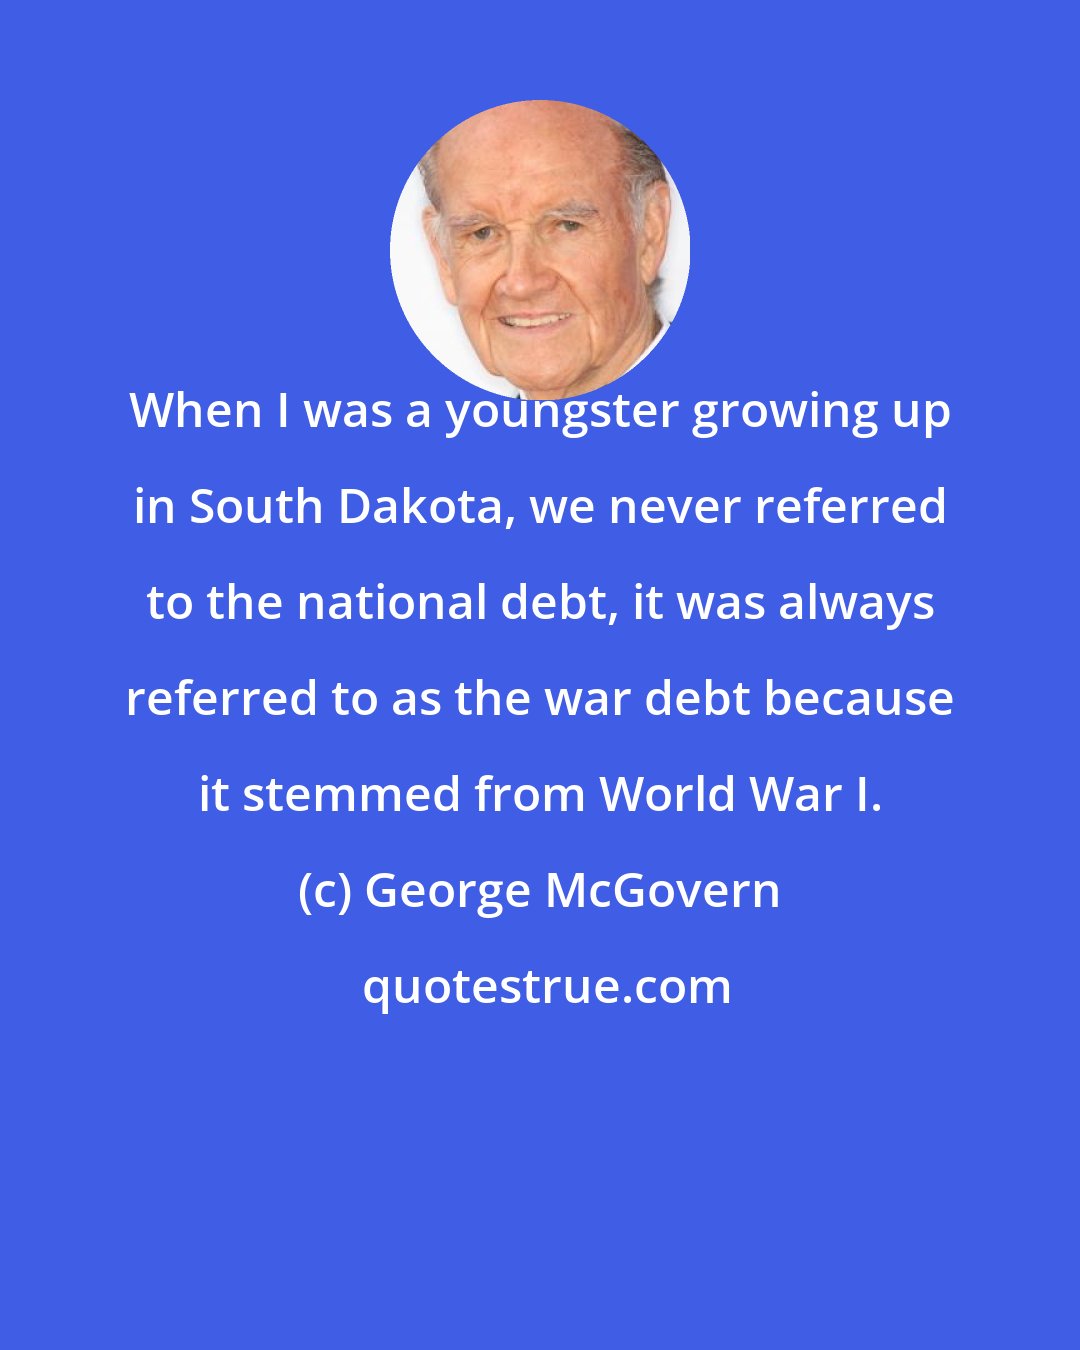 George McGovern: When I was a youngster growing up in South Dakota, we never referred to the national debt, it was always referred to as the war debt because it stemmed from World War I.